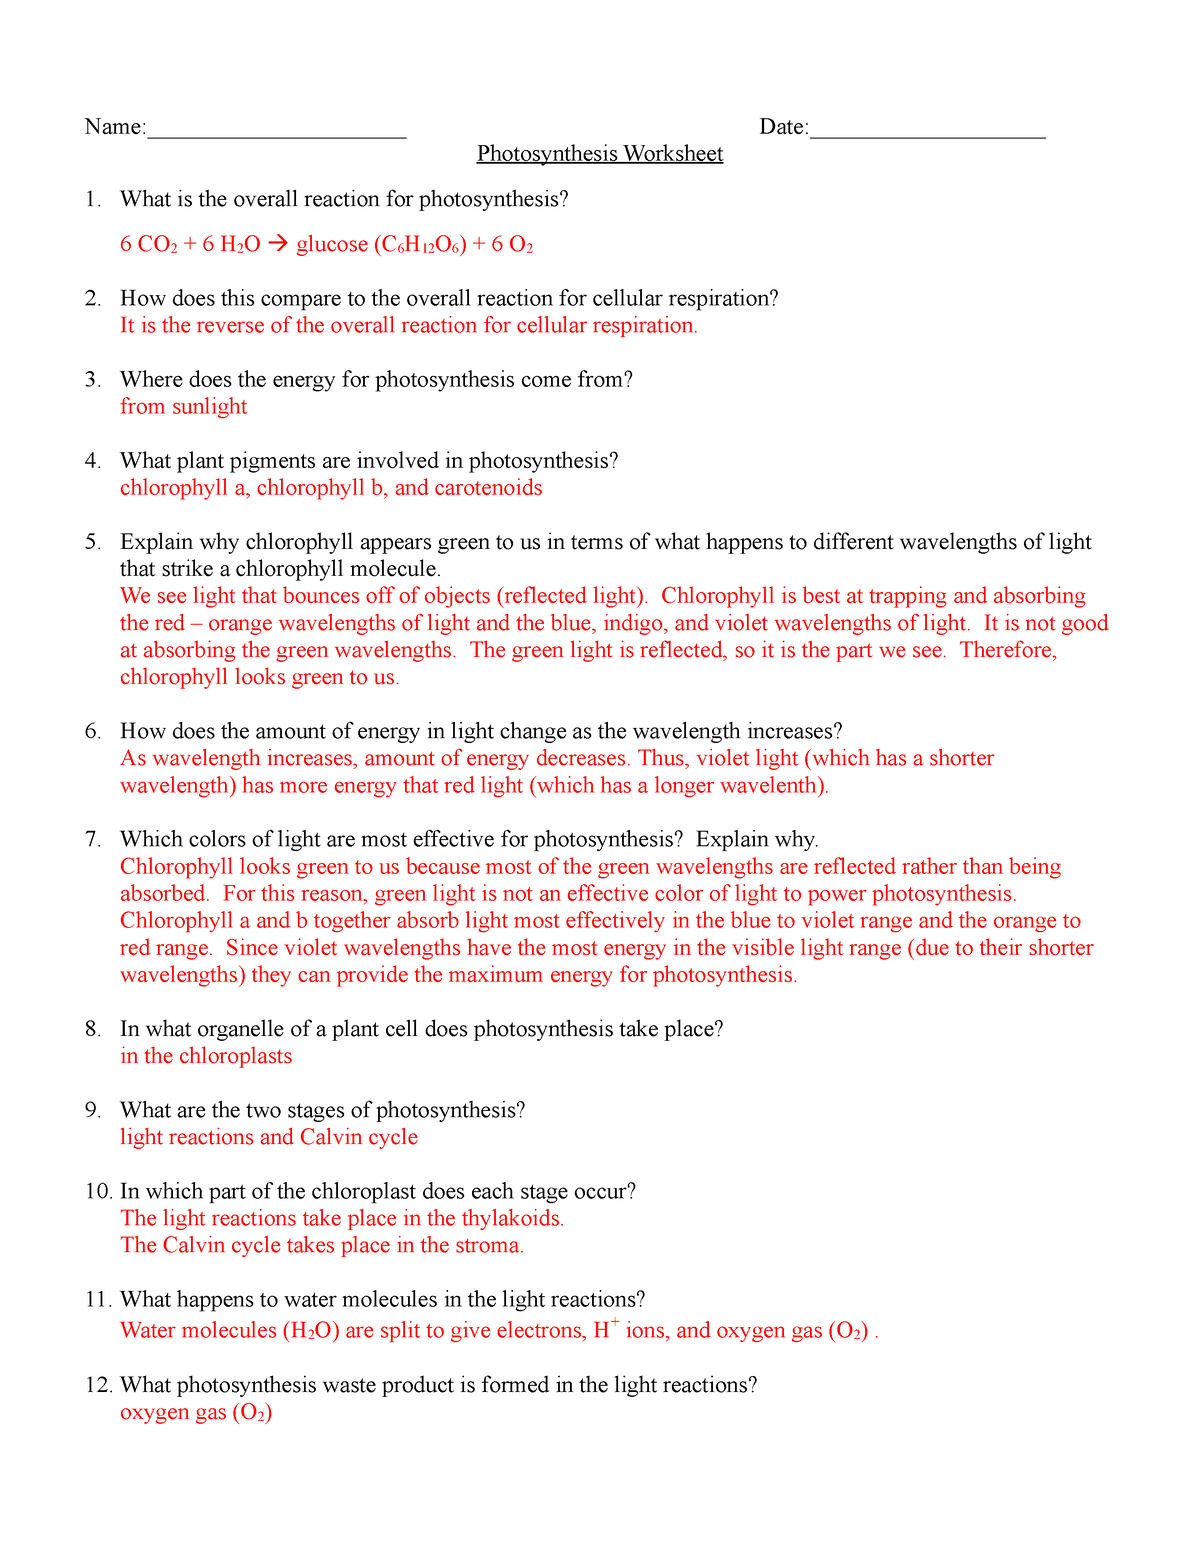 Photosynthesis Worksheet answers Name: Date